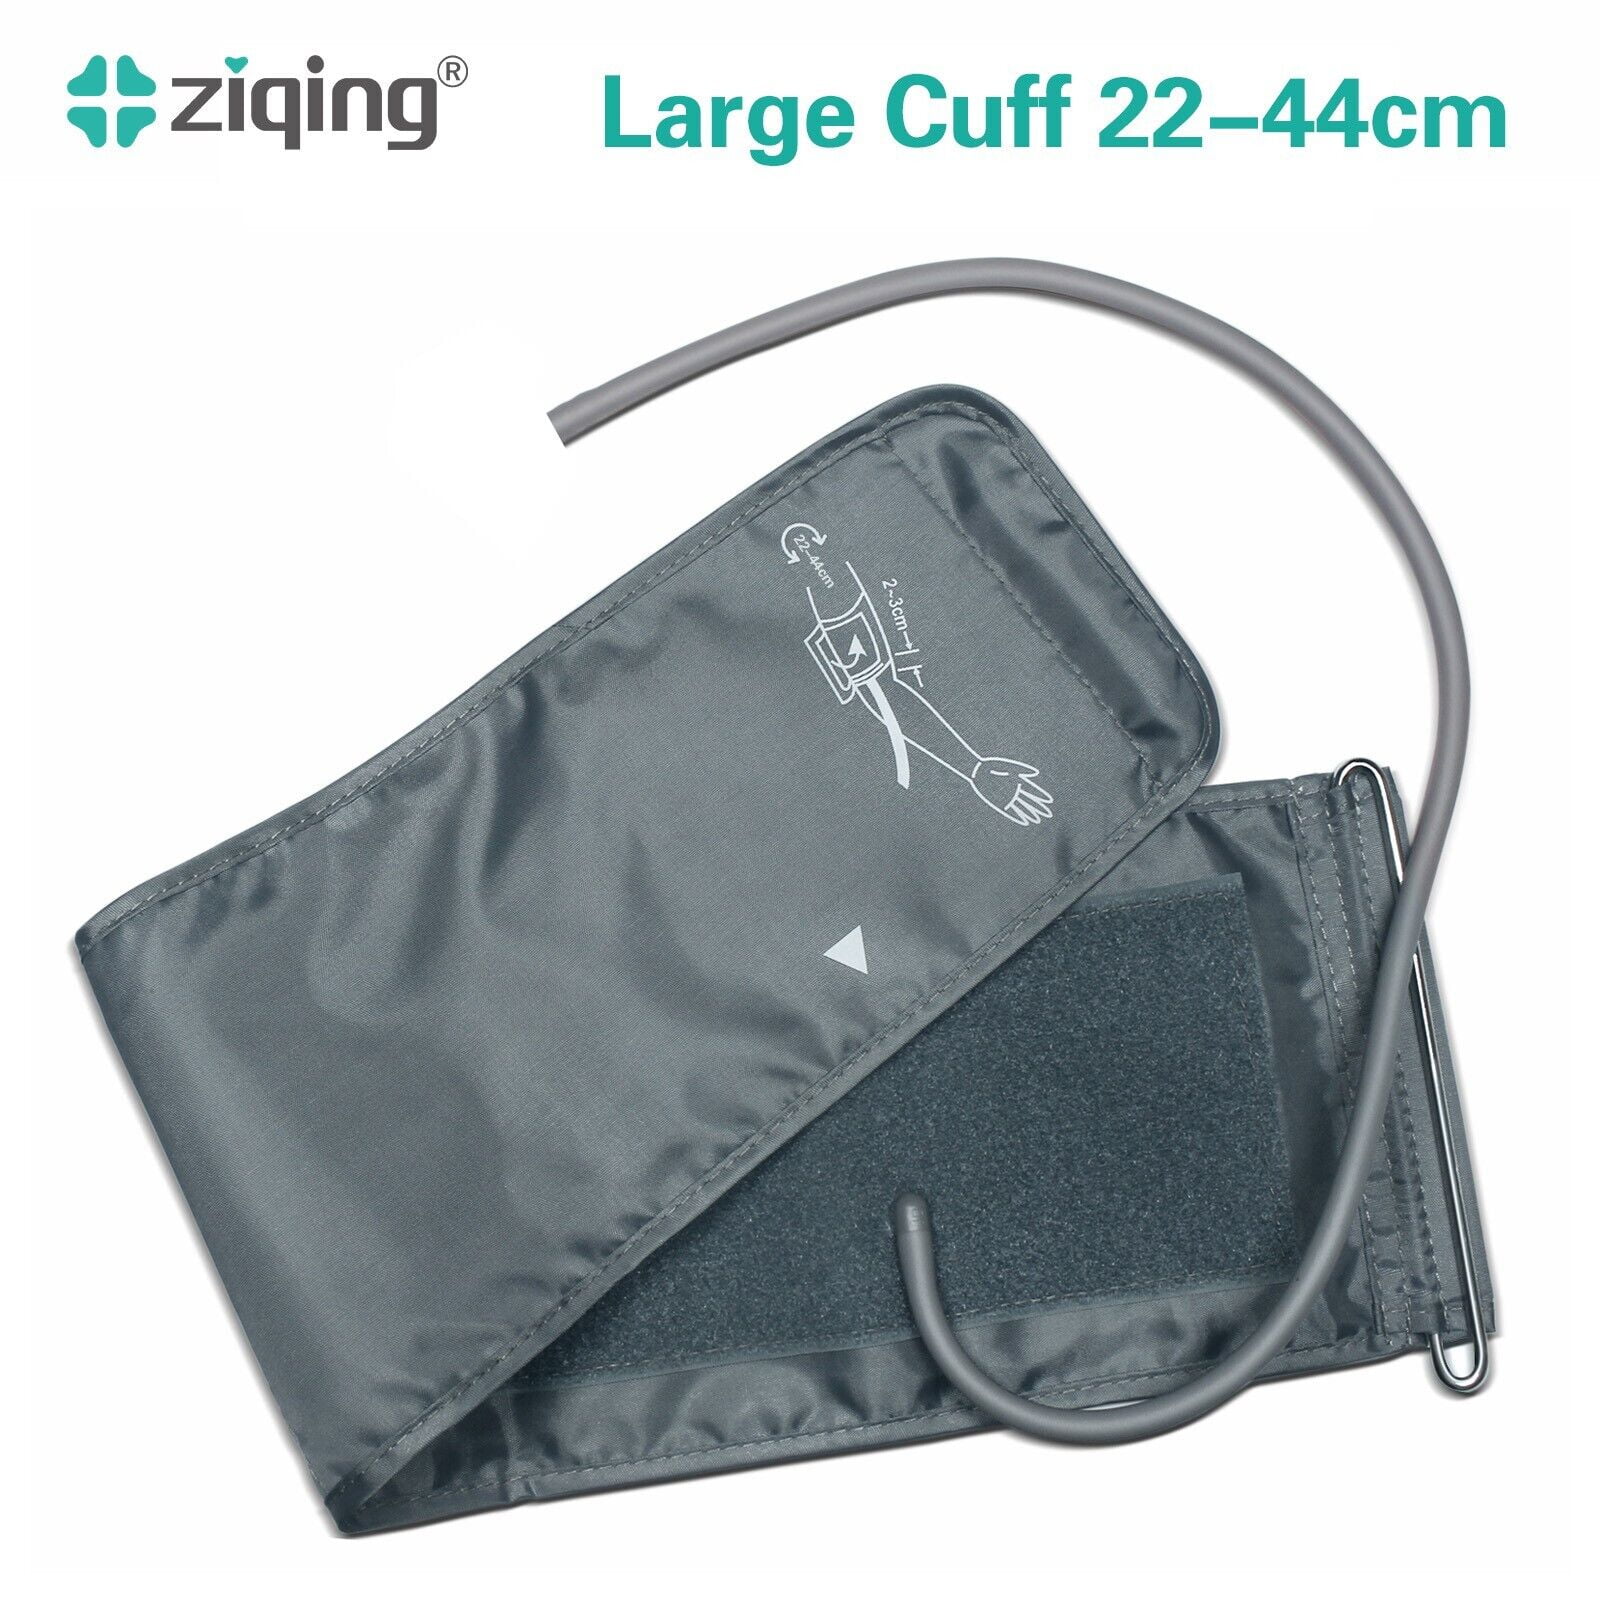 Zqing Big Extra Arm Replacement Blood pressure Cuff 22-52cm with